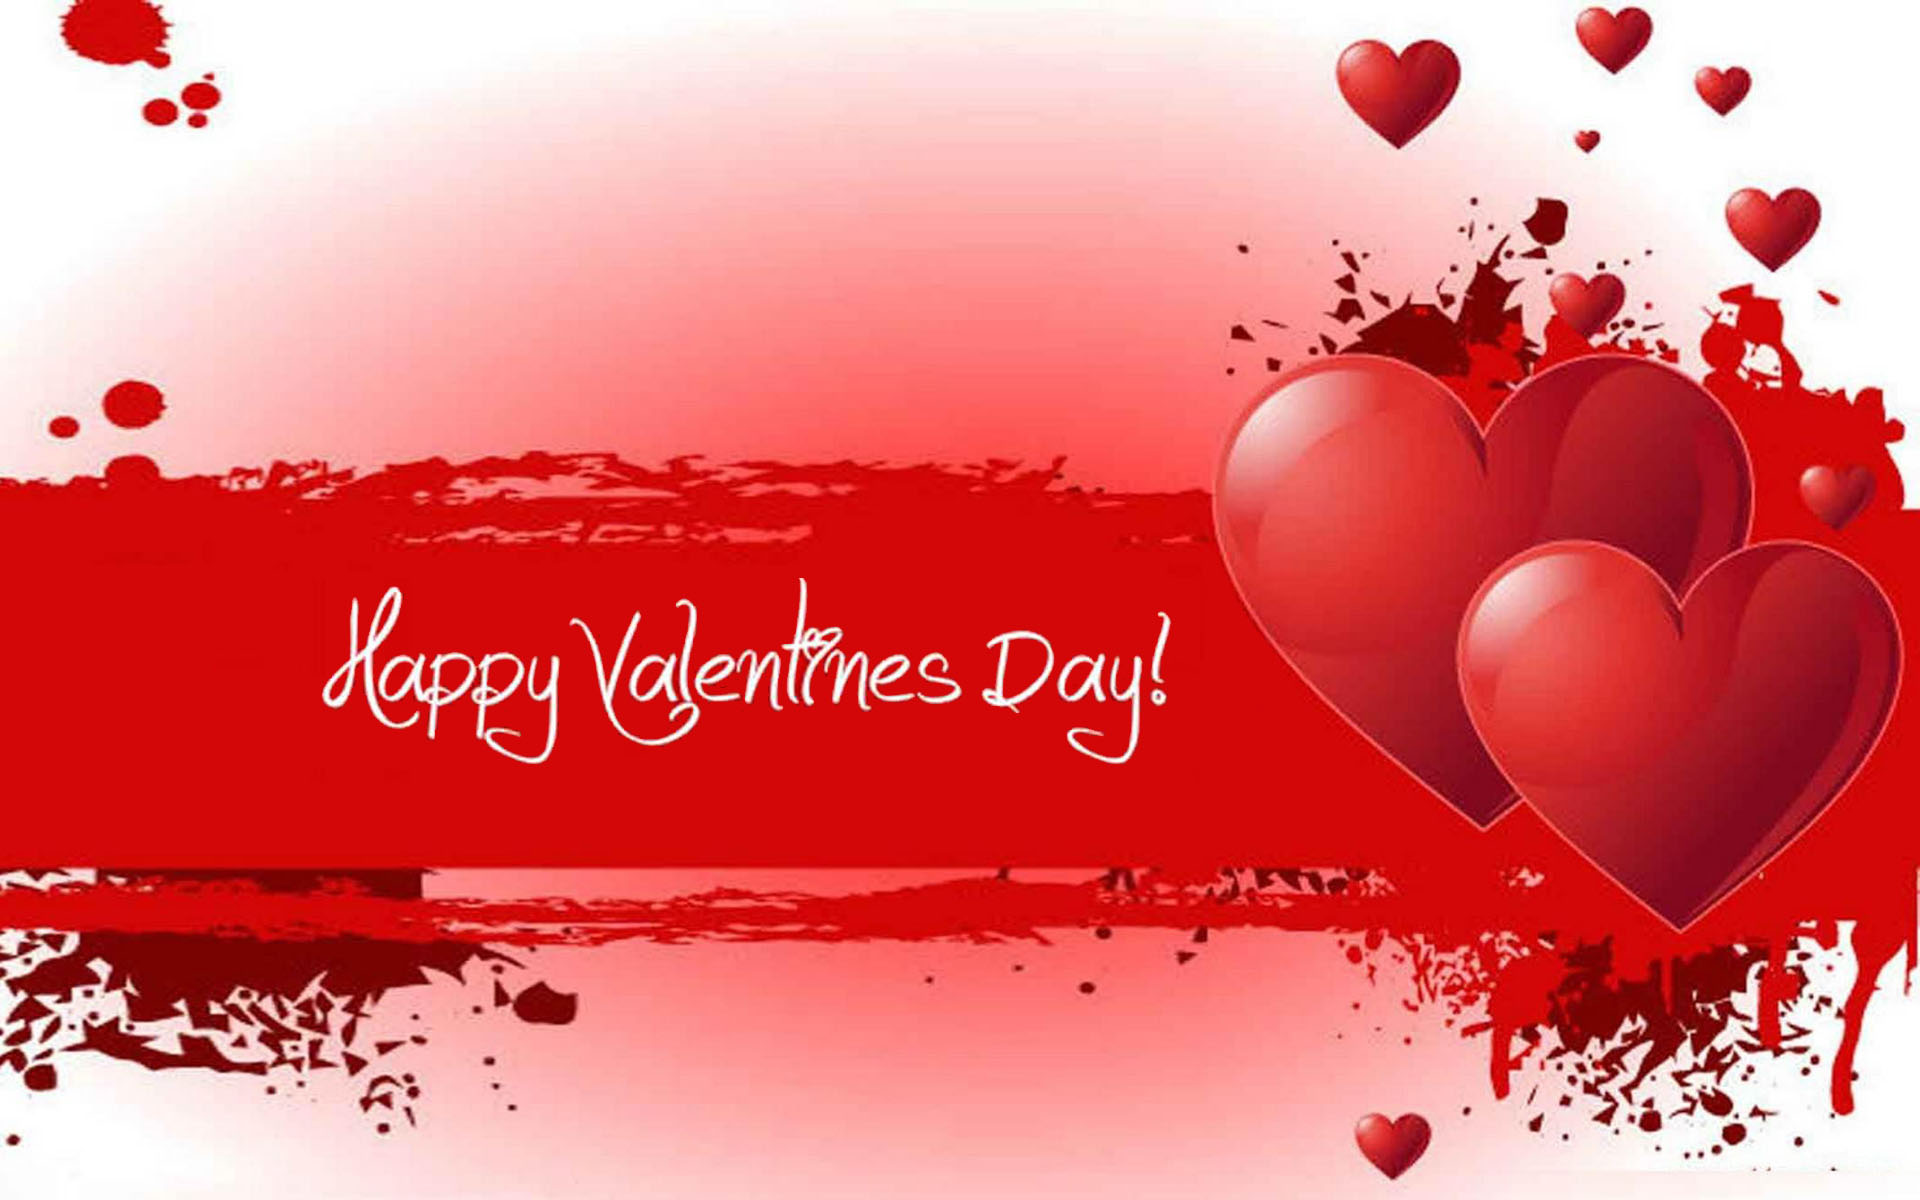 Happy Valentines Day Red Heart Photos For Facebook Whatsapp Wallpaper Hd  For Mobile Phone 1920x1200 : 